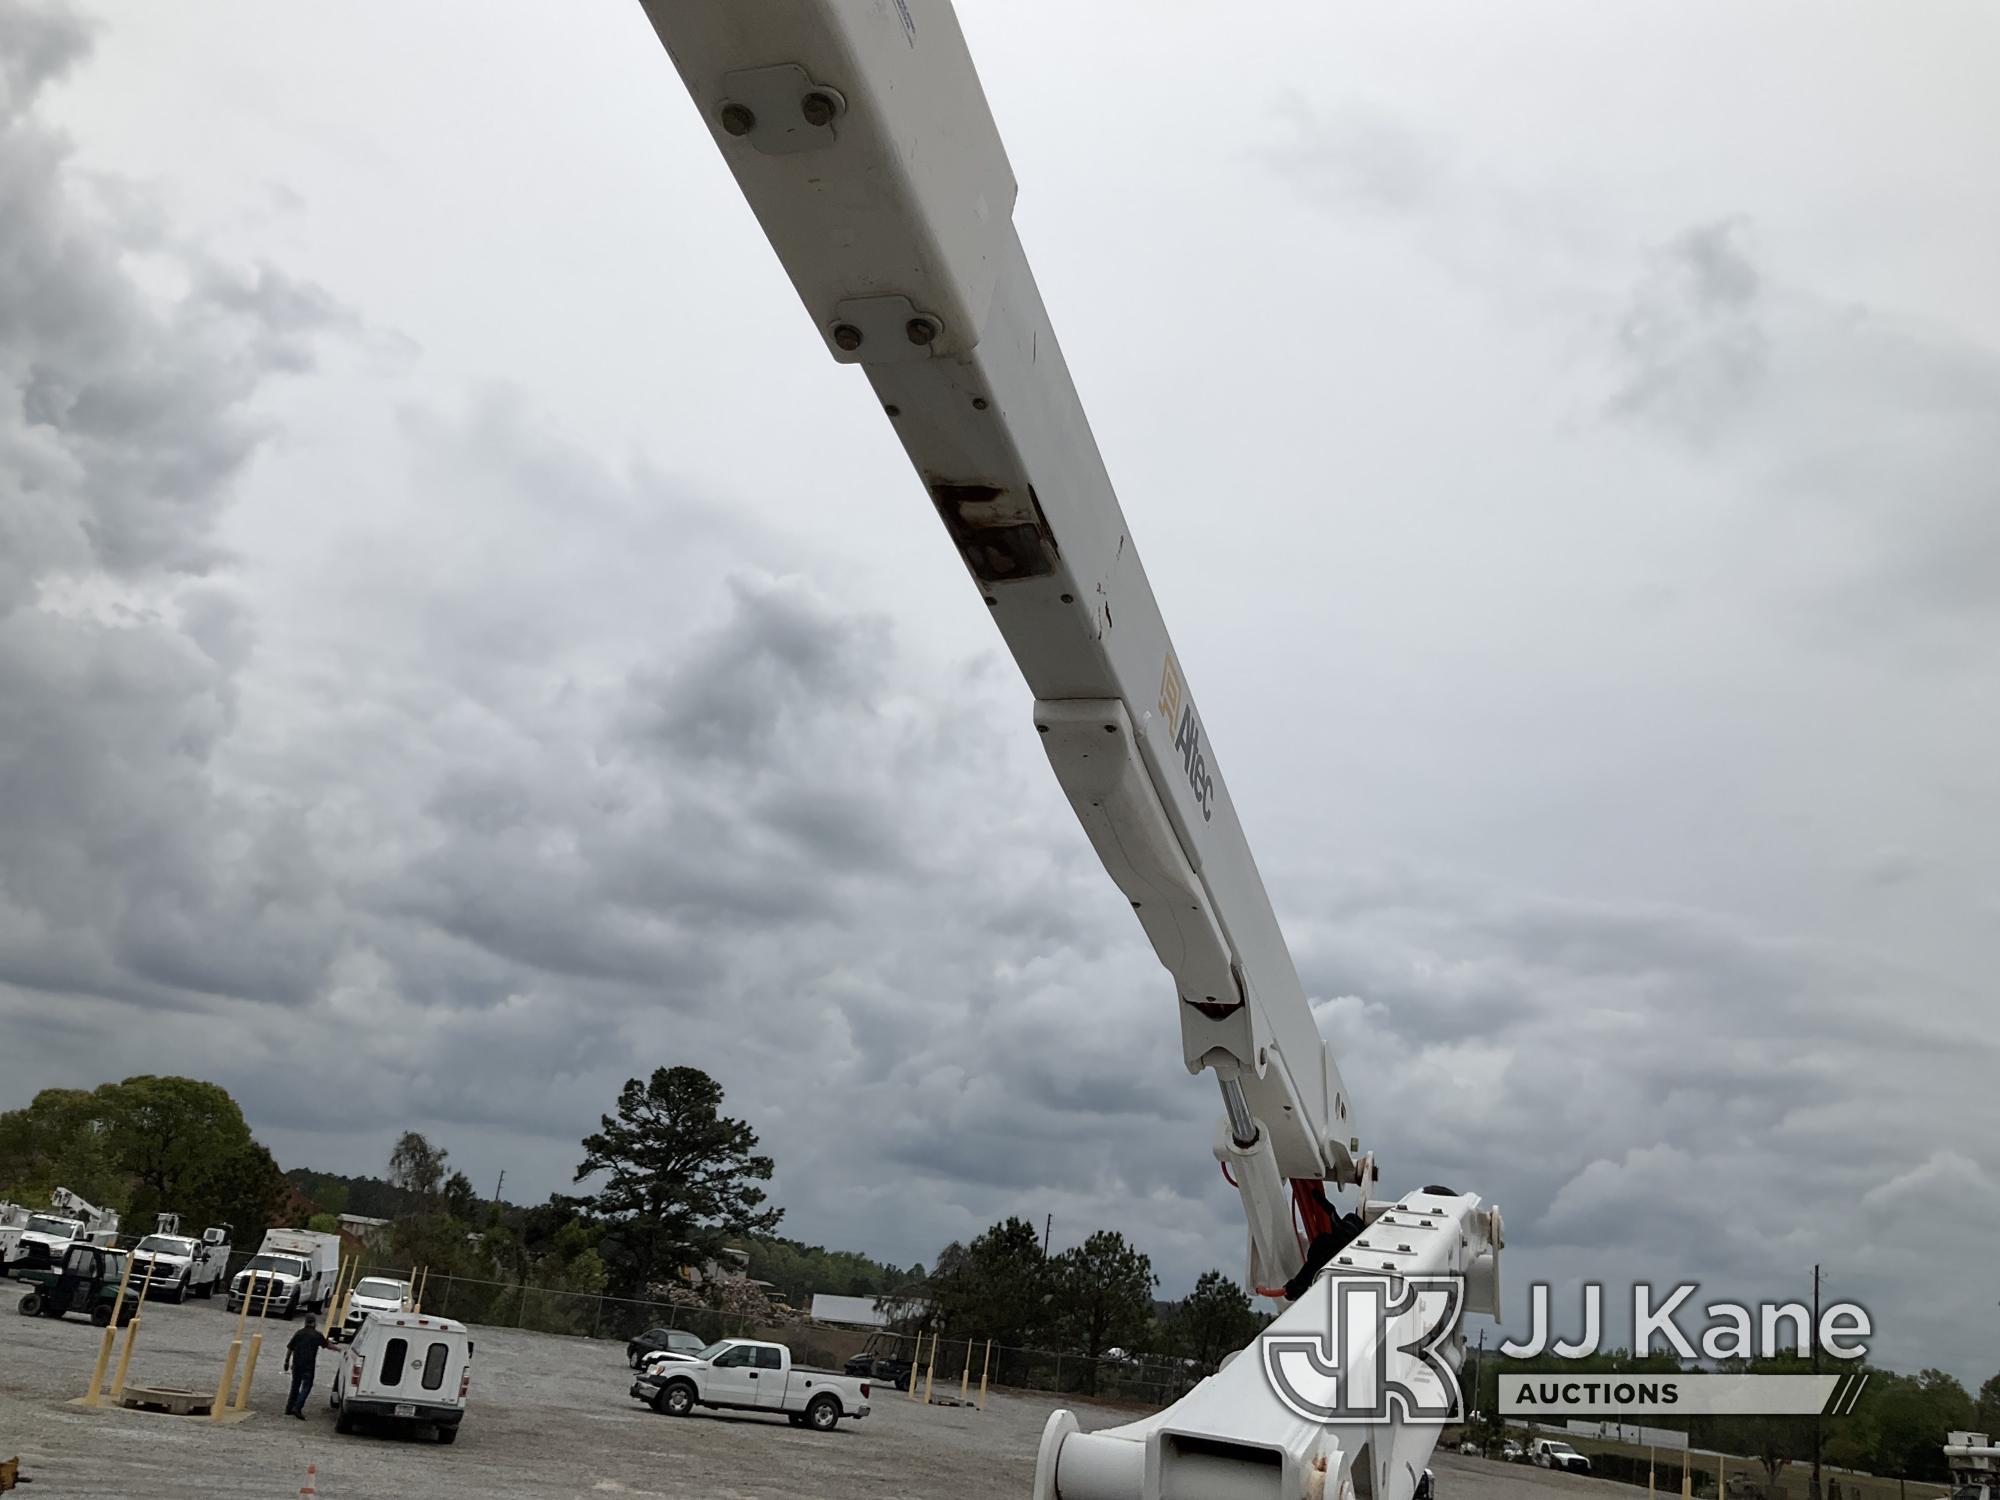 (Villa Rica, GA) Altec AT40G, Articulating & Telescopic Bucket Truck mounted behind cab on 2017 Ford